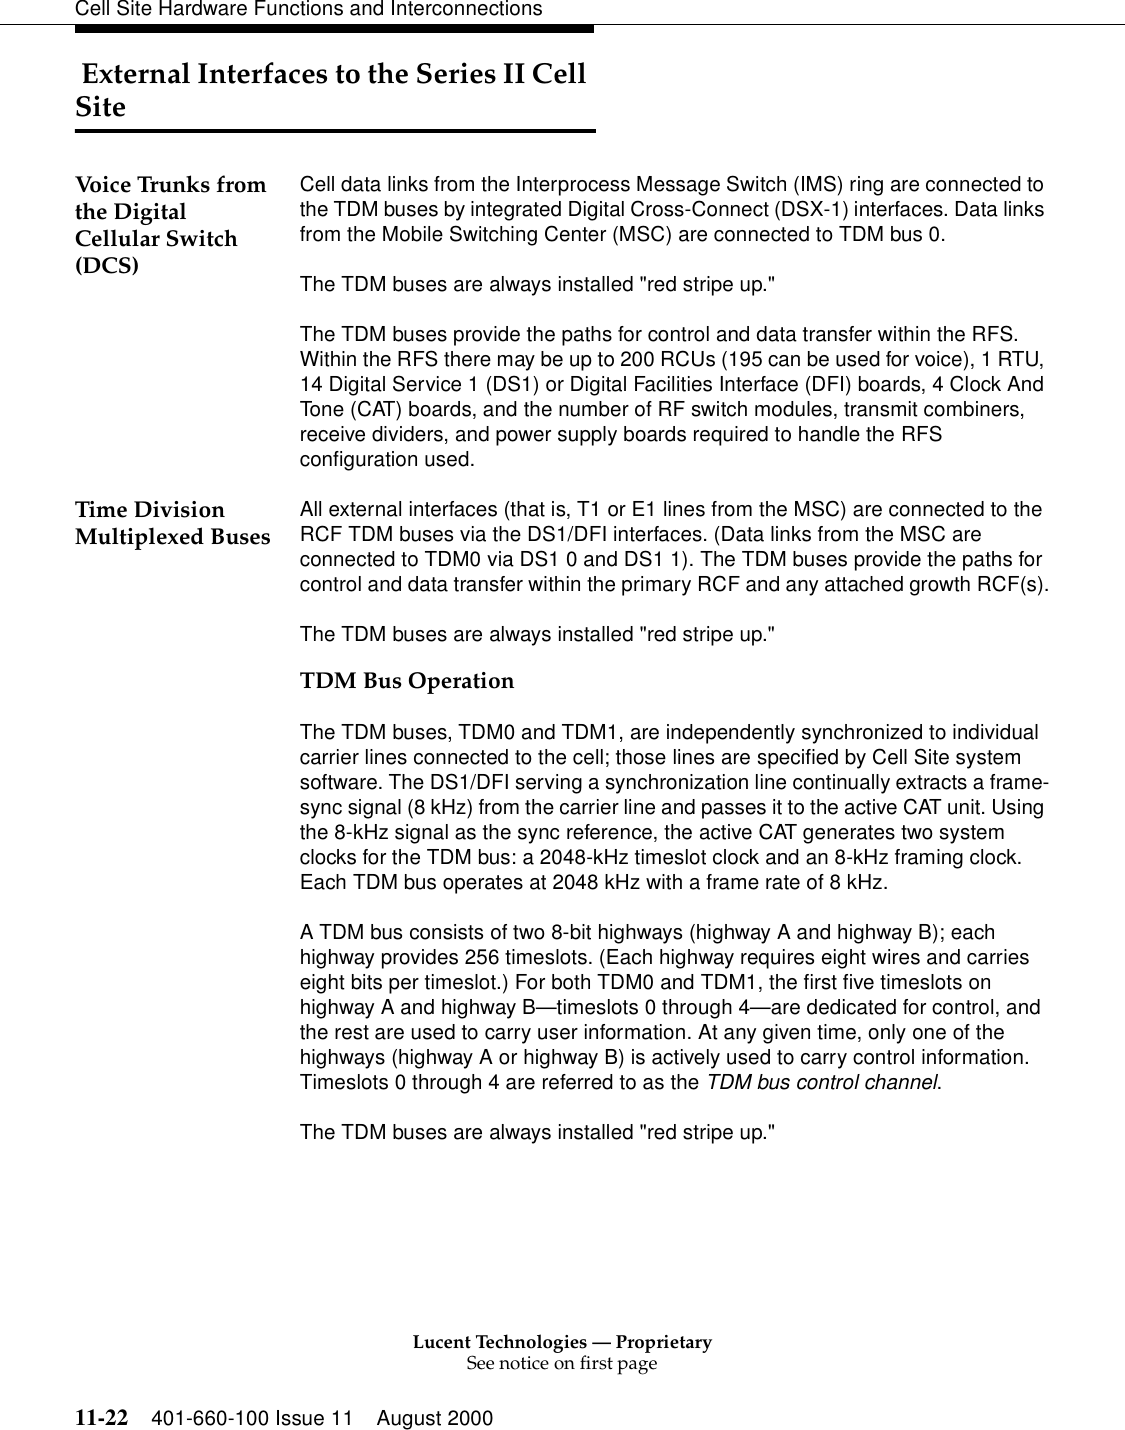 Lucent Technologies — ProprietarySee notice on first page11-22 401-660-100 Issue 11 August 2000Cell Site Hardware Functions and Interconnections External Interfaces to the Series II Cell SiteVoice Trunks from the Digital Cellular Switch (DCS) Cell data links from the Interprocess Message Switch (IMS) ring are connected to the TDM buses by integrated Digital Cross-Connect (DSX-1) interfaces. Data links from the Mobile Switching Center (MSC) are connected to TDM bus 0. The TDM buses are always installed &quot;red stripe up.&quot;The TDM buses provide the paths for control and data transfer within the RFS. Within the RFS there may be up to 200 RCUs (195 can be used for voice), 1 RTU, 14 Digital Service 1 (DS1) or Digital Facilities Interface (DFI) boards, 4 Clock And Tone (CAT) boards, and the number of RF switch modules, transmit combiners, receive dividers, and power supply boards required to handle the RFS configuration used. Time Division Multiplexed Buses All external interfaces (that is, T1 or E1 lines from the MSC) are connected to the RCF TDM buses via the DS1/DFI interfaces. (Data links from the MSC are connected to TDM0 via DS1 0 and DS1 1). The TDM buses provide the paths for control and data transfer within the primary RCF and any attached growth RCF(s).The TDM buses are always installed &quot;red stripe up.&quot;TDM Bus OperationThe TDM buses, TDM0 and TDM1, are independently synchronized to individual carrier lines connected to the cell; those lines are specified by Cell Site system software. The DS1/DFI serving a synchronization line continually extracts a frame-sync signal (8 kHz) from the carrier line and passes it to the active CAT unit. Using the 8-kHz signal as the sync reference, the active CAT generates two system clocks for the TDM bus: a 2048-kHz timeslot clock and an 8-kHz framing clock. Each TDM bus operates at 2048 kHz with a frame rate of 8 kHz.A TDM bus consists of two 8-bit highways (highway A and highway B); each highway provides 256 timeslots. (Each highway requires eight wires and carries eight bits per timeslot.) For both TDM0 and TDM1, the first five timeslots on highway A and highway B—timeslots 0 through 4—are dedicated for control, and the rest are used to carry user information. At any given time, only one of the highways (highway A or highway B) is actively used to carry control information. Timeslots 0 through 4 are referred to as the TDM bus control channel.The TDM buses are always installed &quot;red stripe up.&quot;